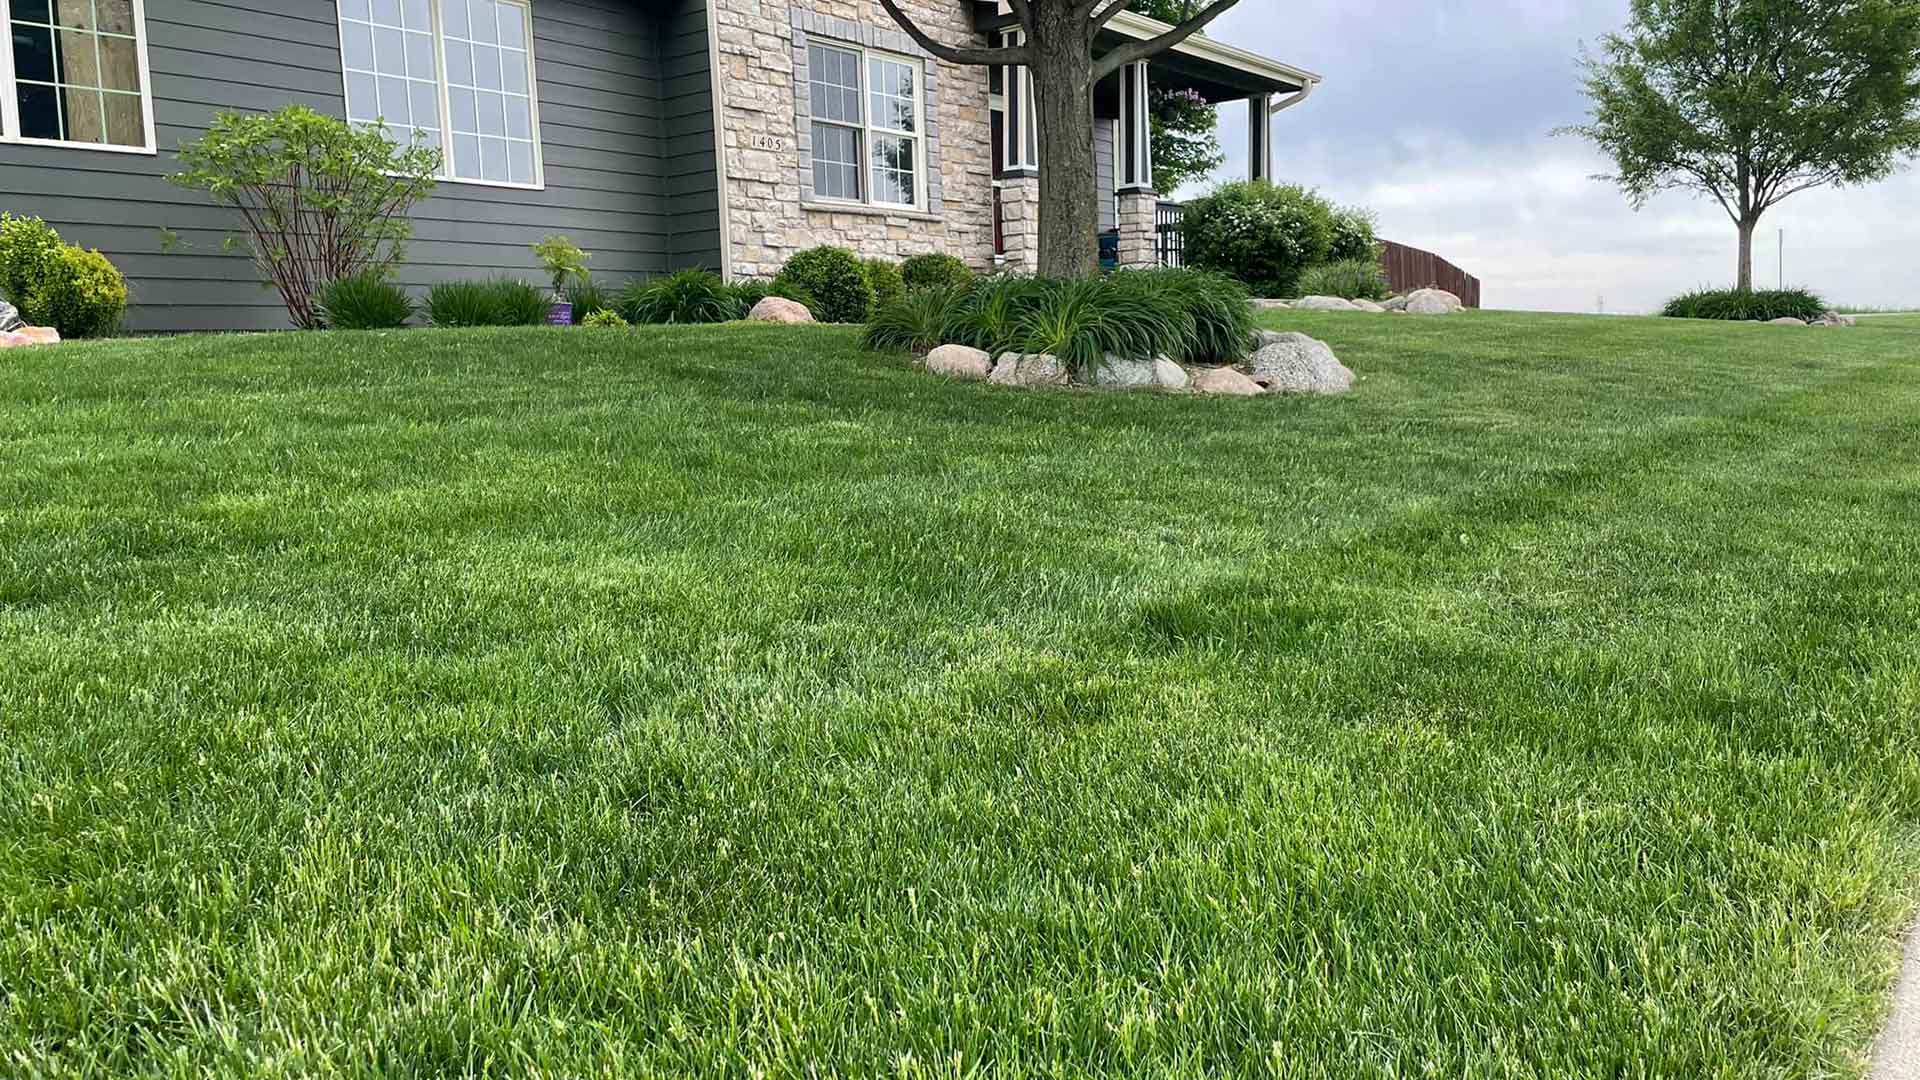 A healthy and maintained landscape in Bondurant, IA.